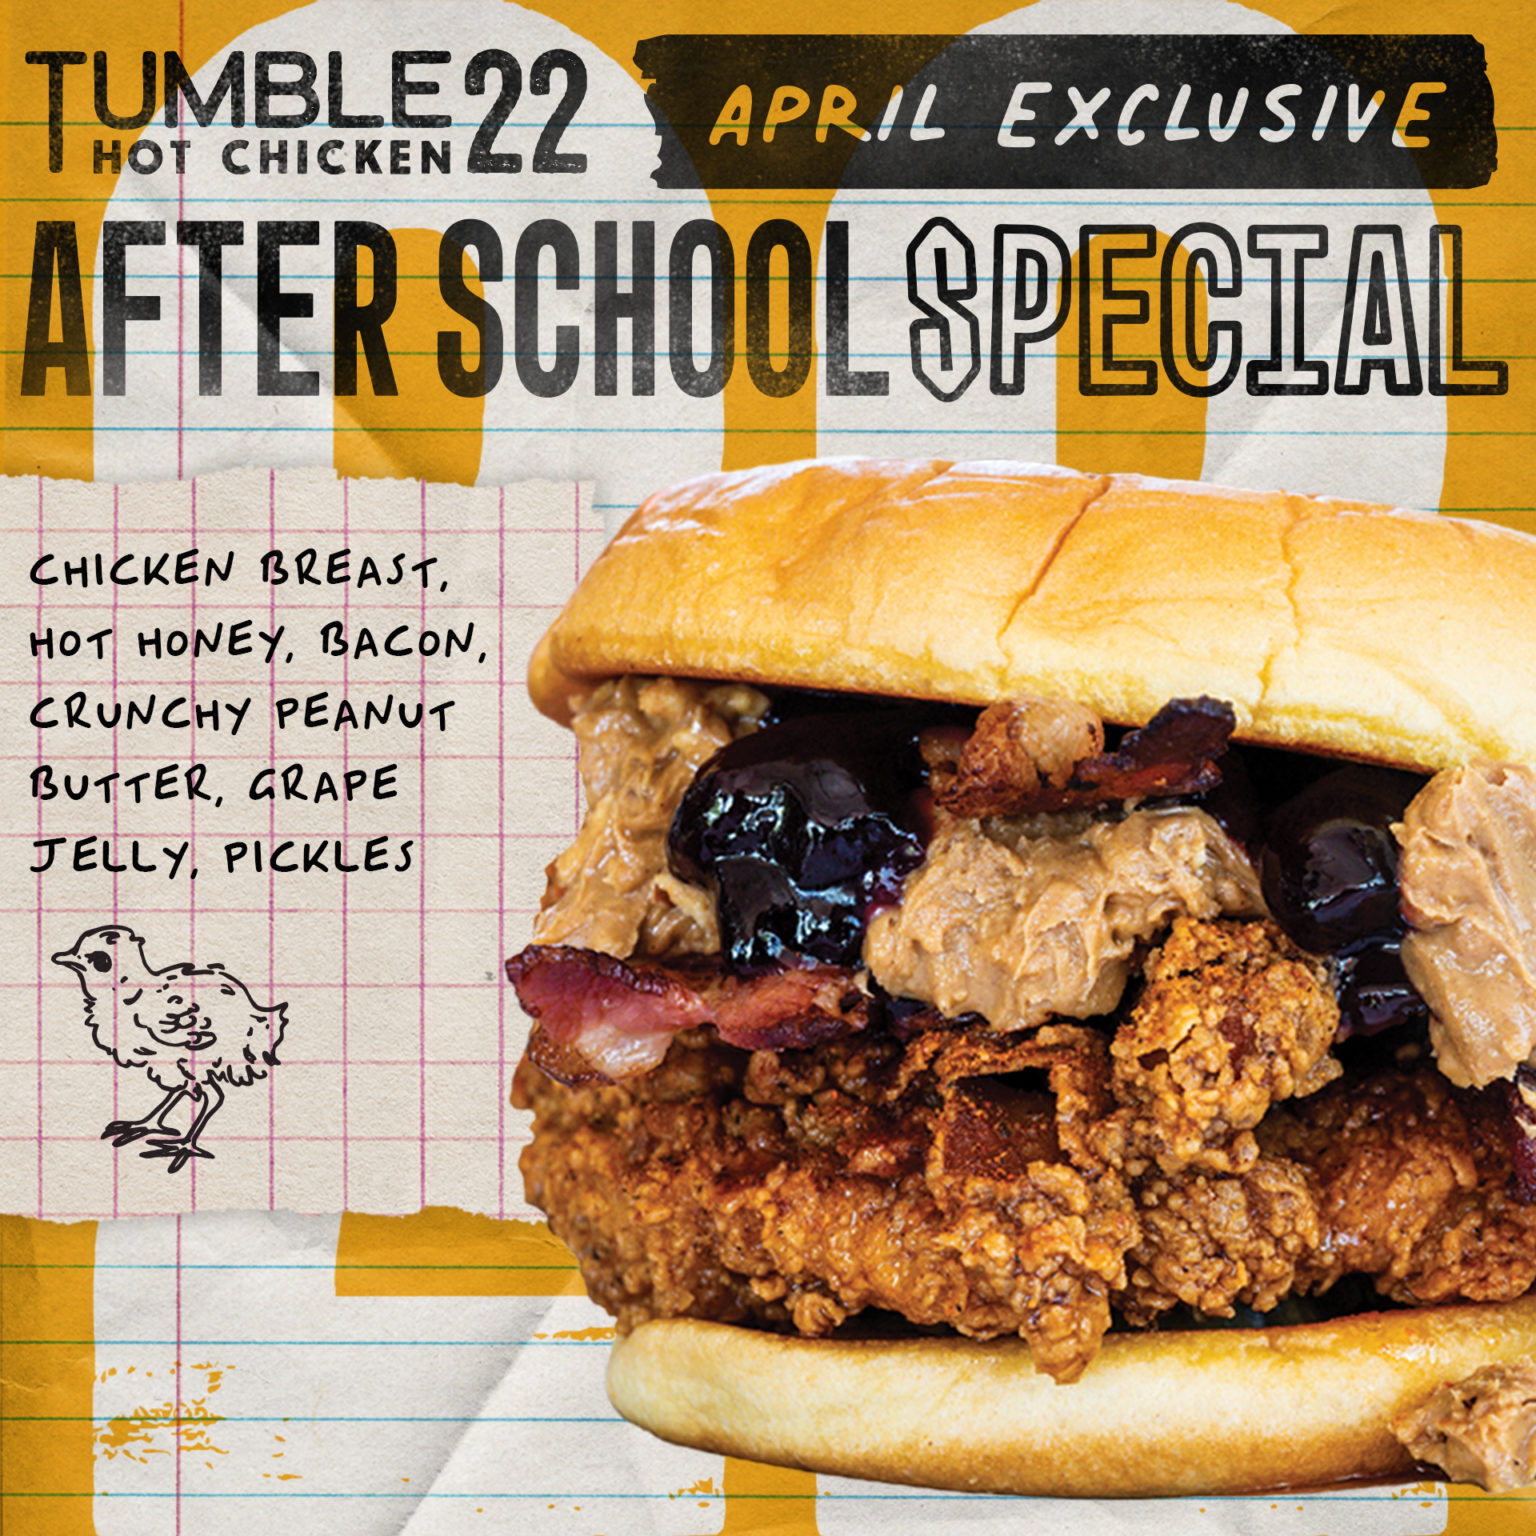 After School Special - April Exclusive O.G.